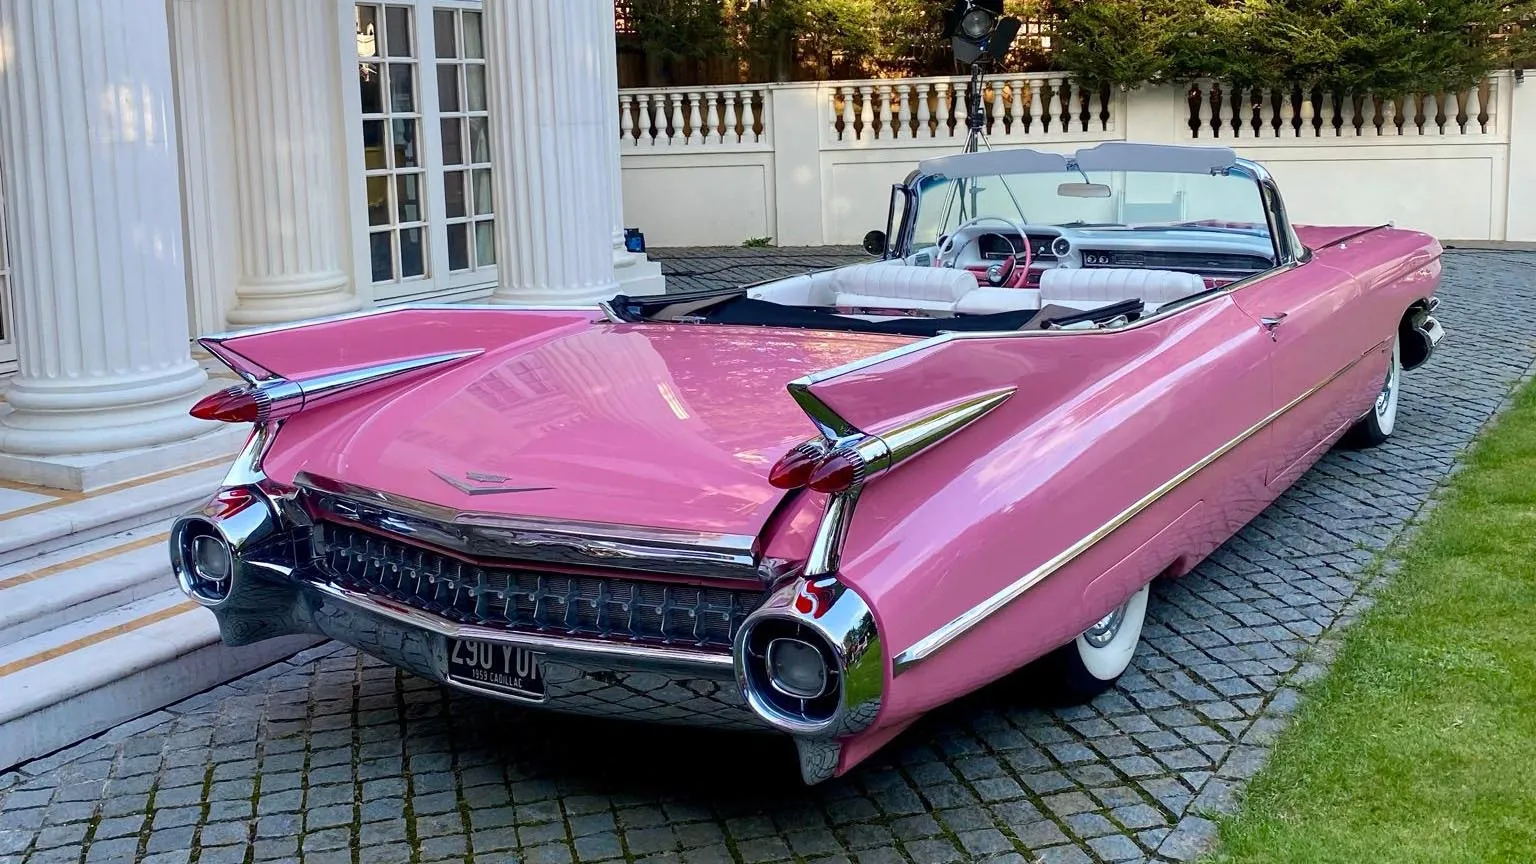 Rear View Pink cadillac showing High Fin Tails and Chrome Bumper